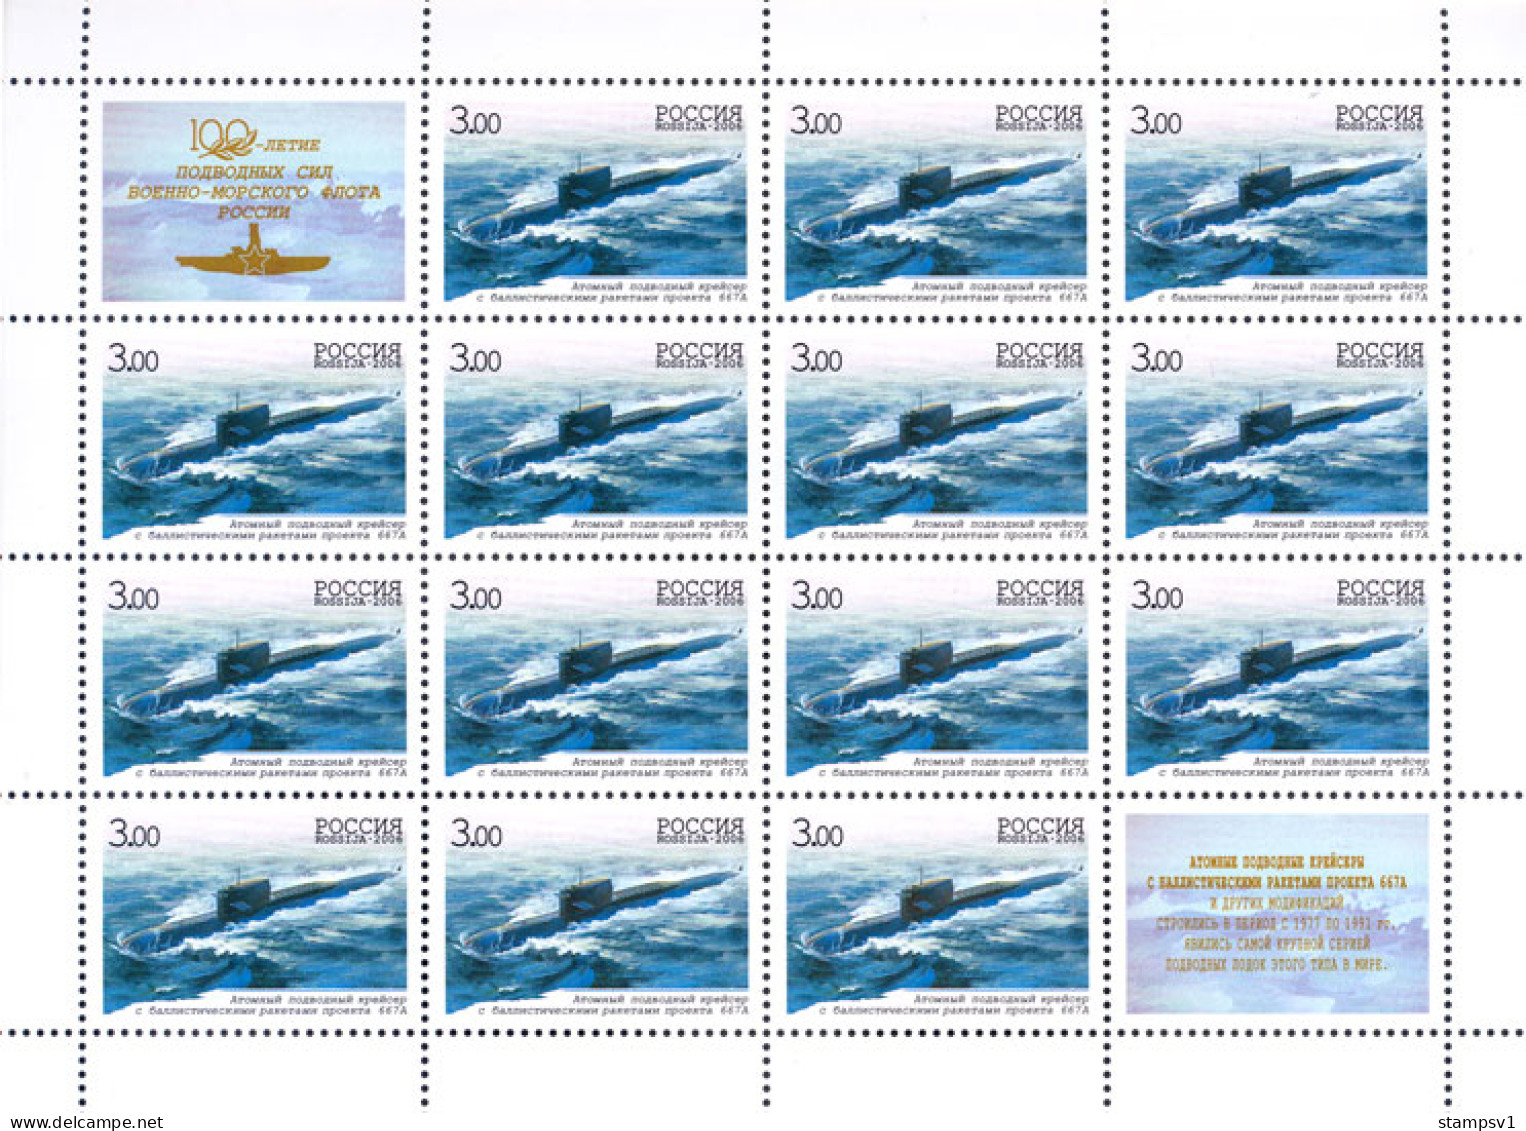 Russia 2006 The 100th Anniversary Of The Russian Navy Underwater Forces. Mi 1311-14 4 Klb - Submarinos